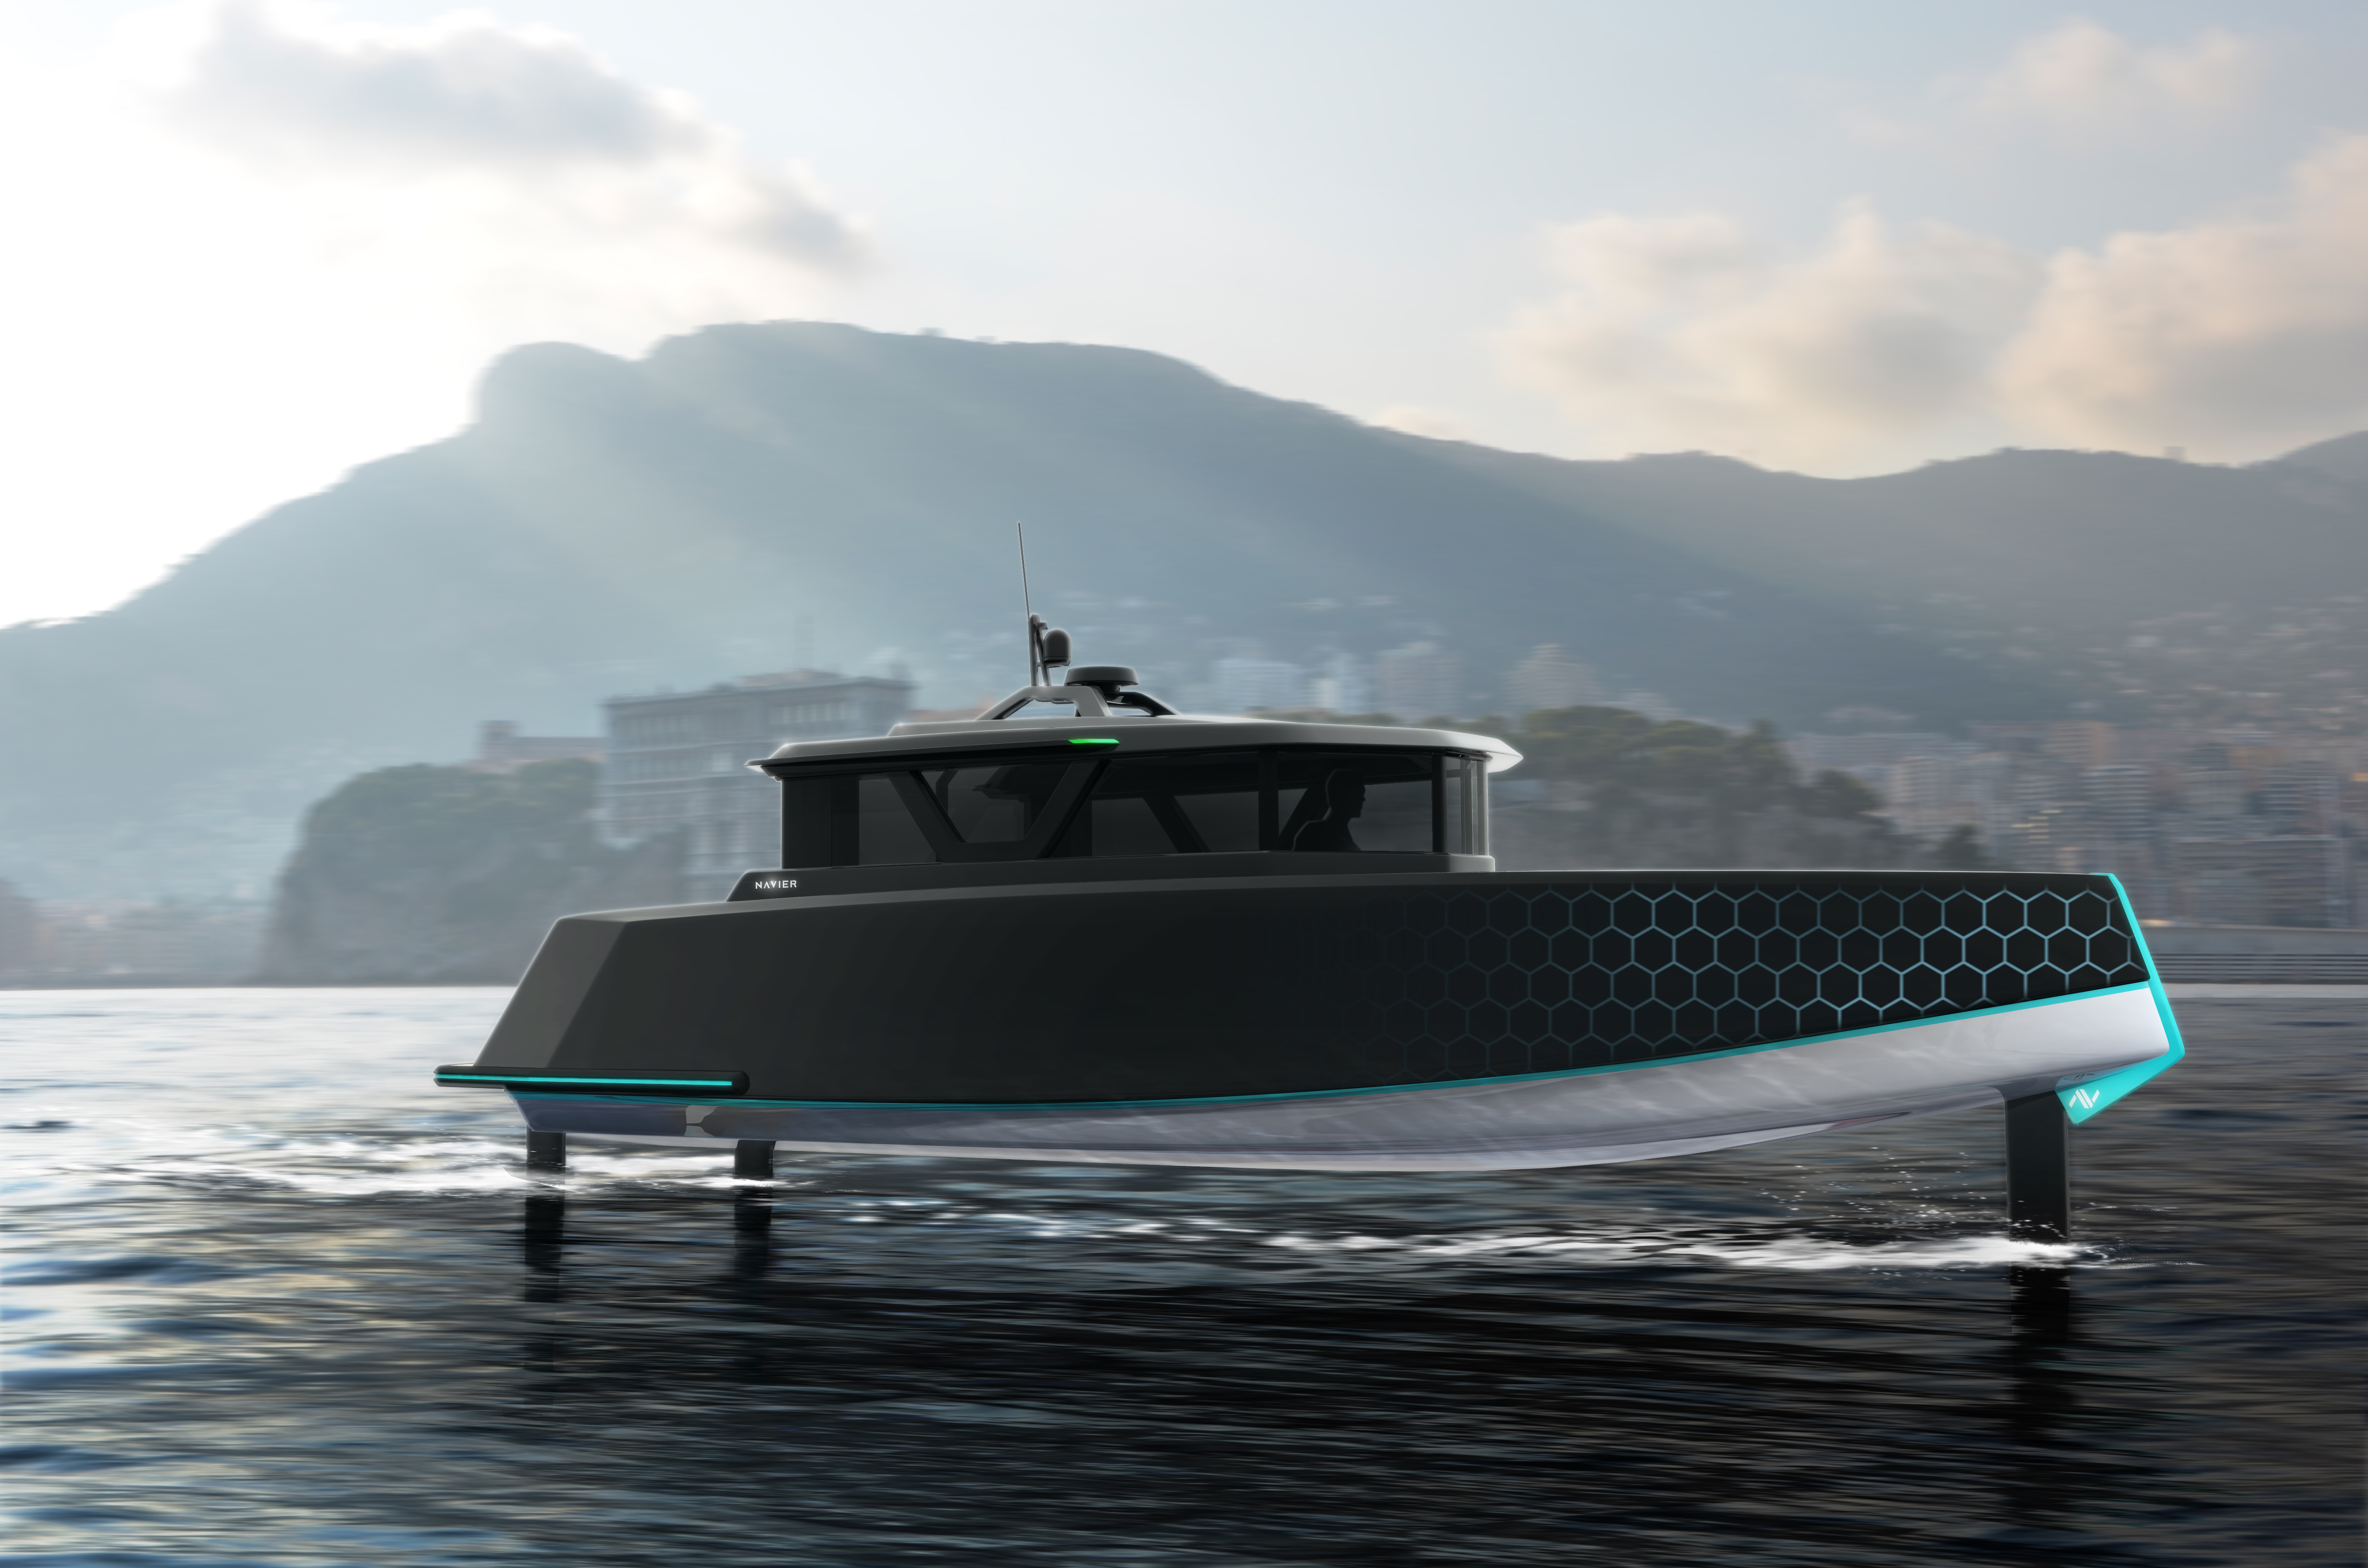 Navier wants to ‘democratize the waterways’ with leisure boats starting at $300K